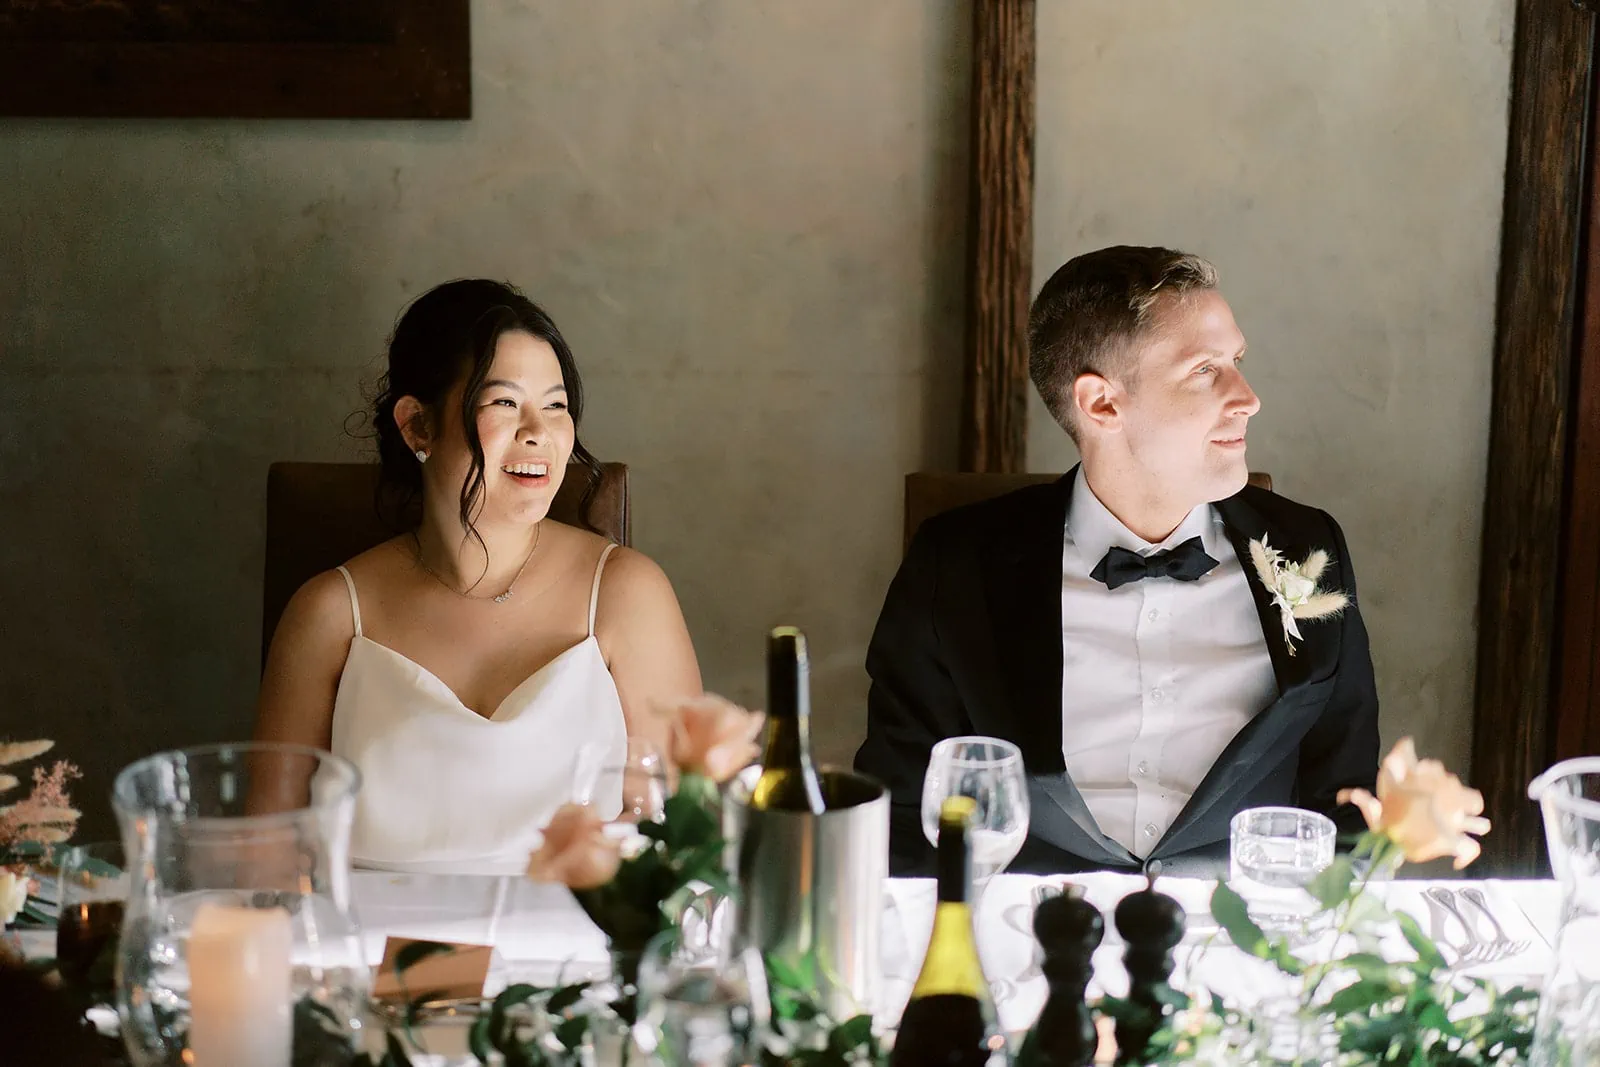 Queenstown Elopement Heli Wedding Photographer クイーンズタウン結婚式 | A bride and groom, Mj & Shane, exchanging smiles at their Wedding reception table at Stoneridge Queenstown.